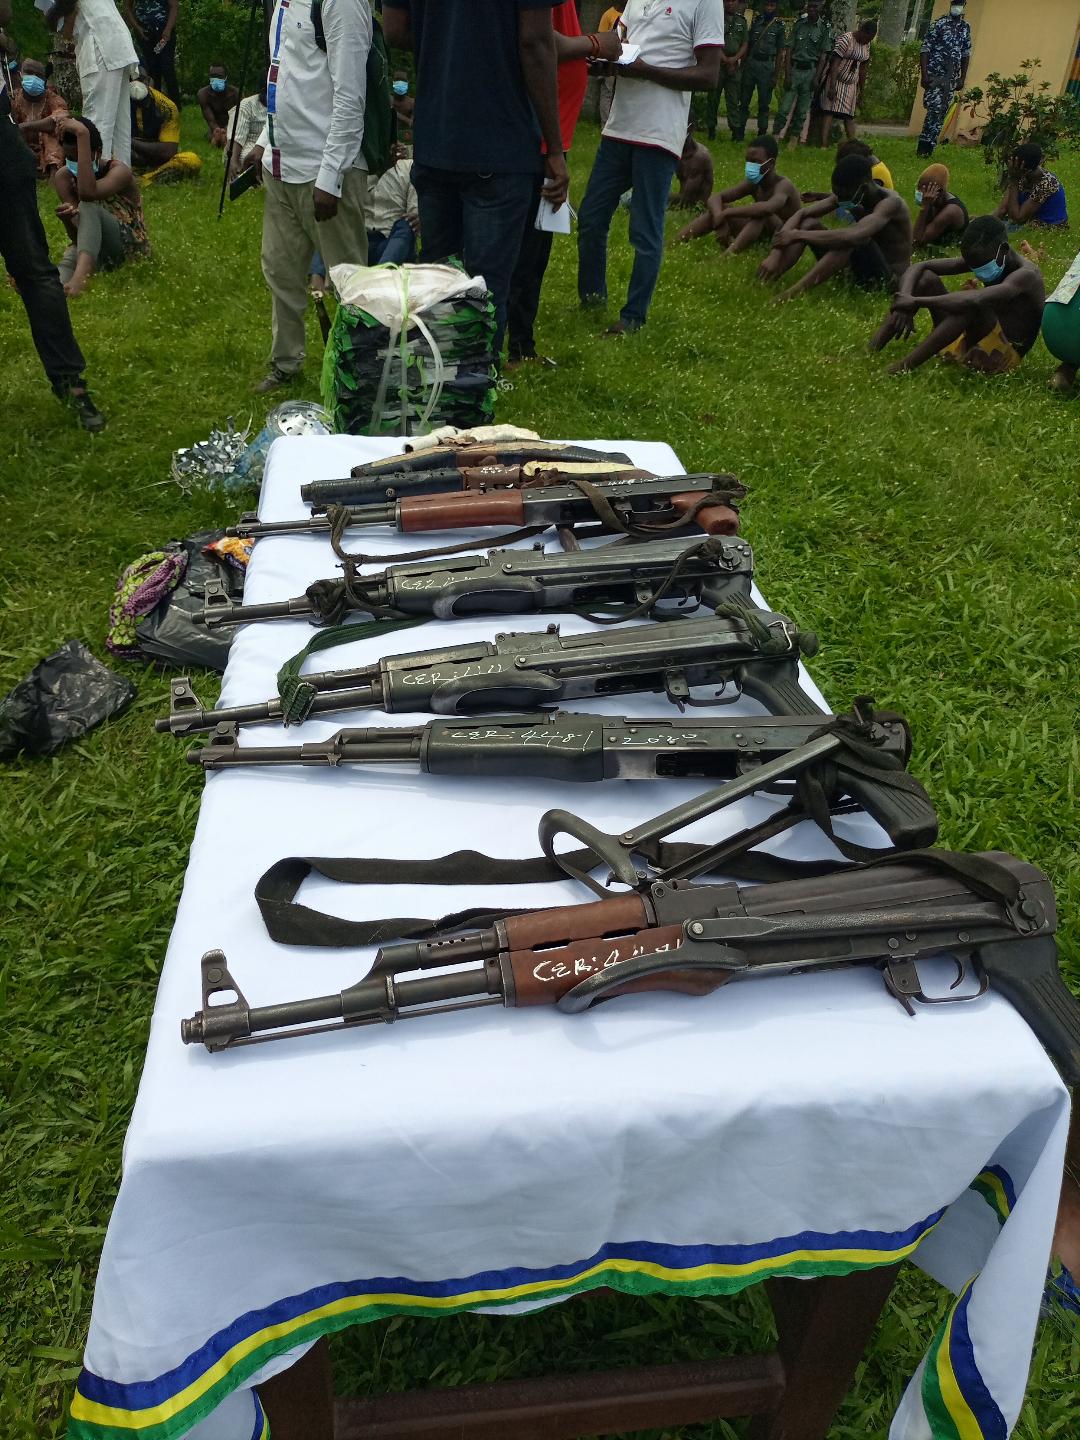 Some of the recovered rifles by Edo Police Command on Wenesday